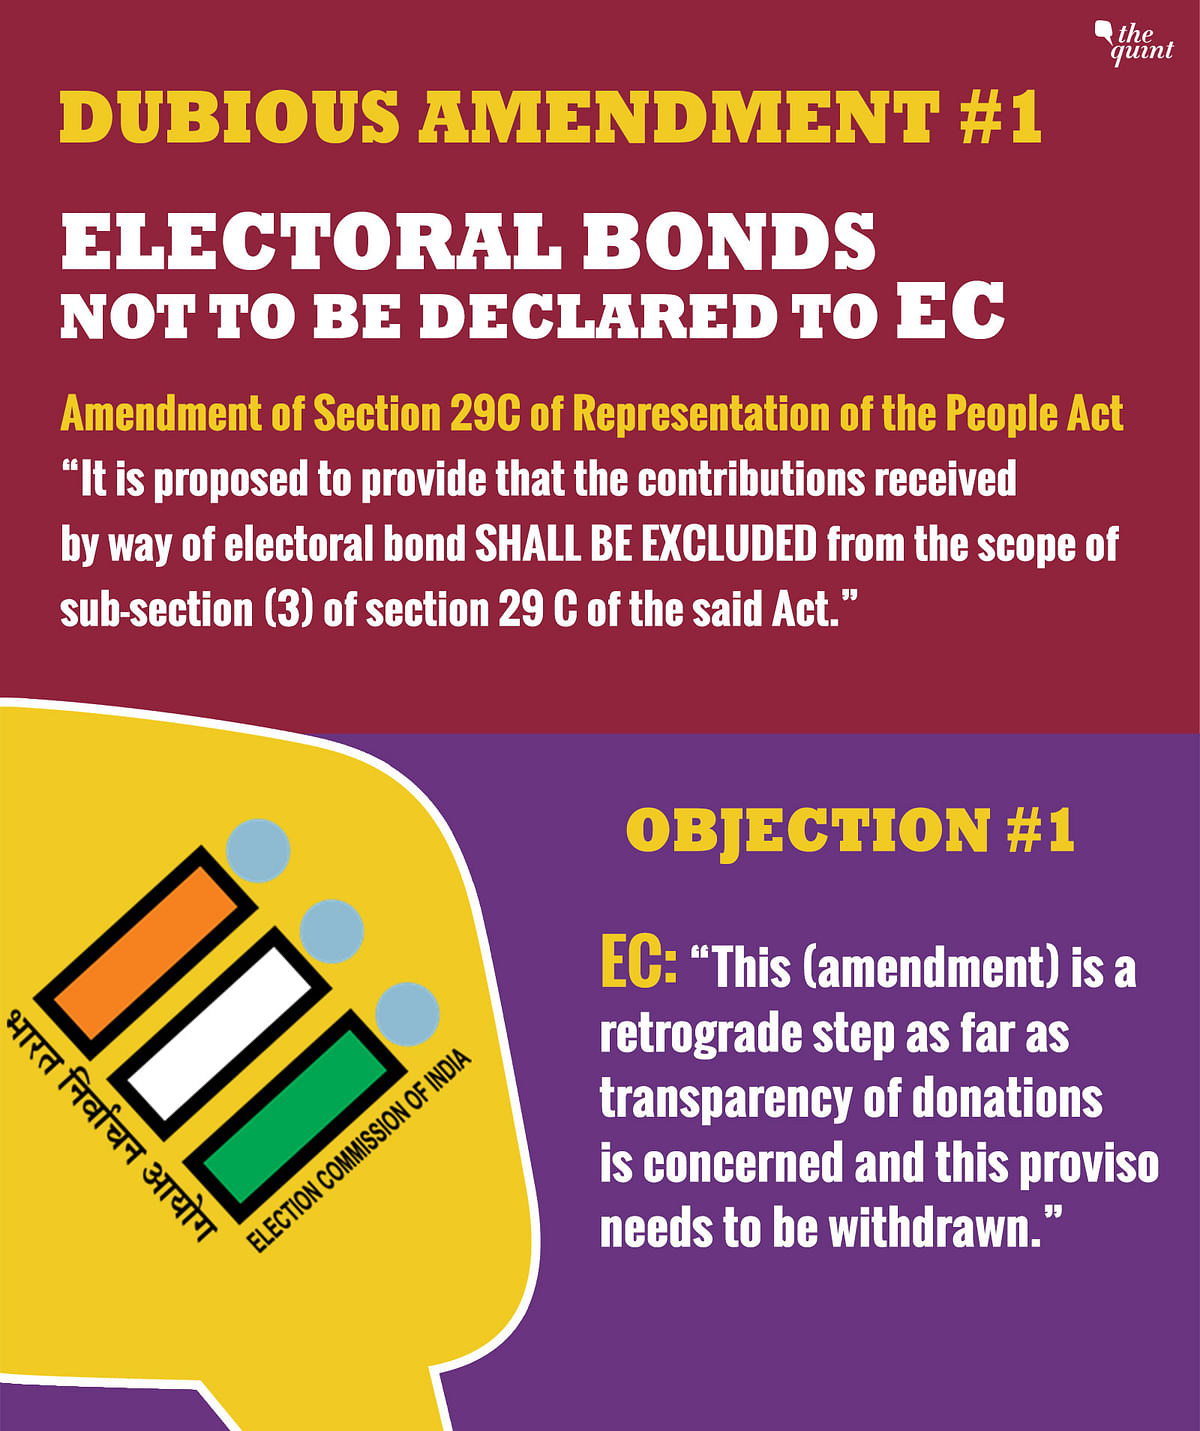 Political parties don’t need to declare donations received through electoral bonds to the Election Commission.